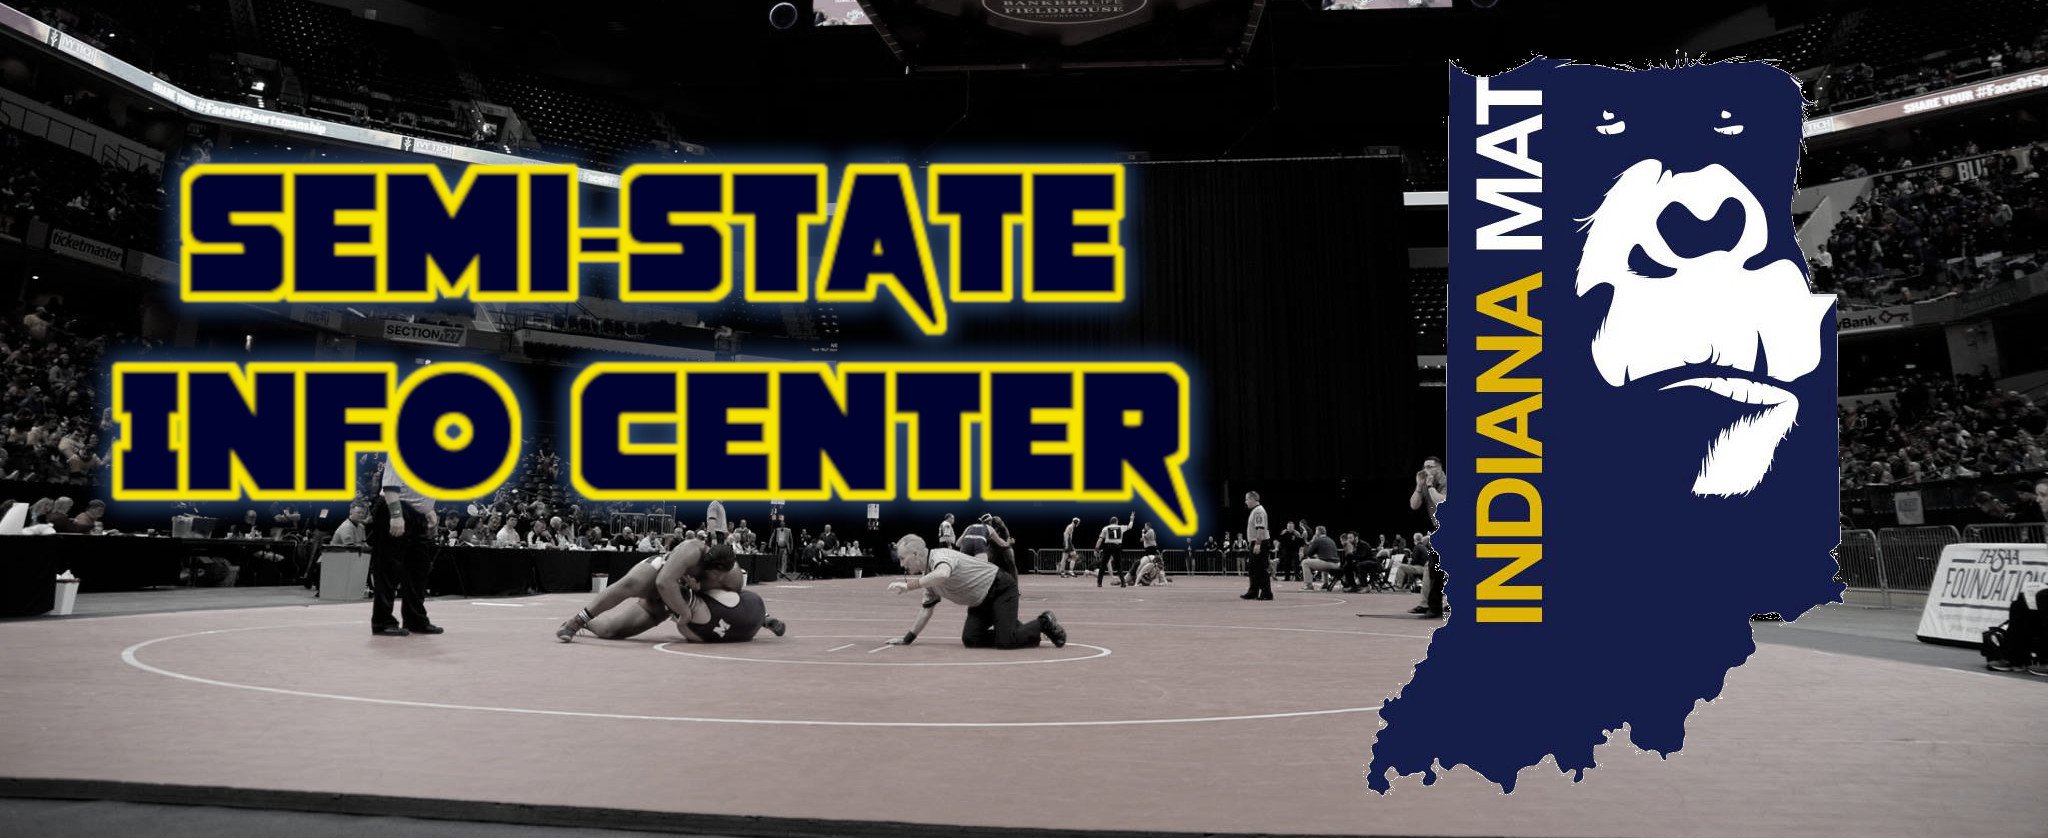 More information about "2022 Semi-State Information Center"